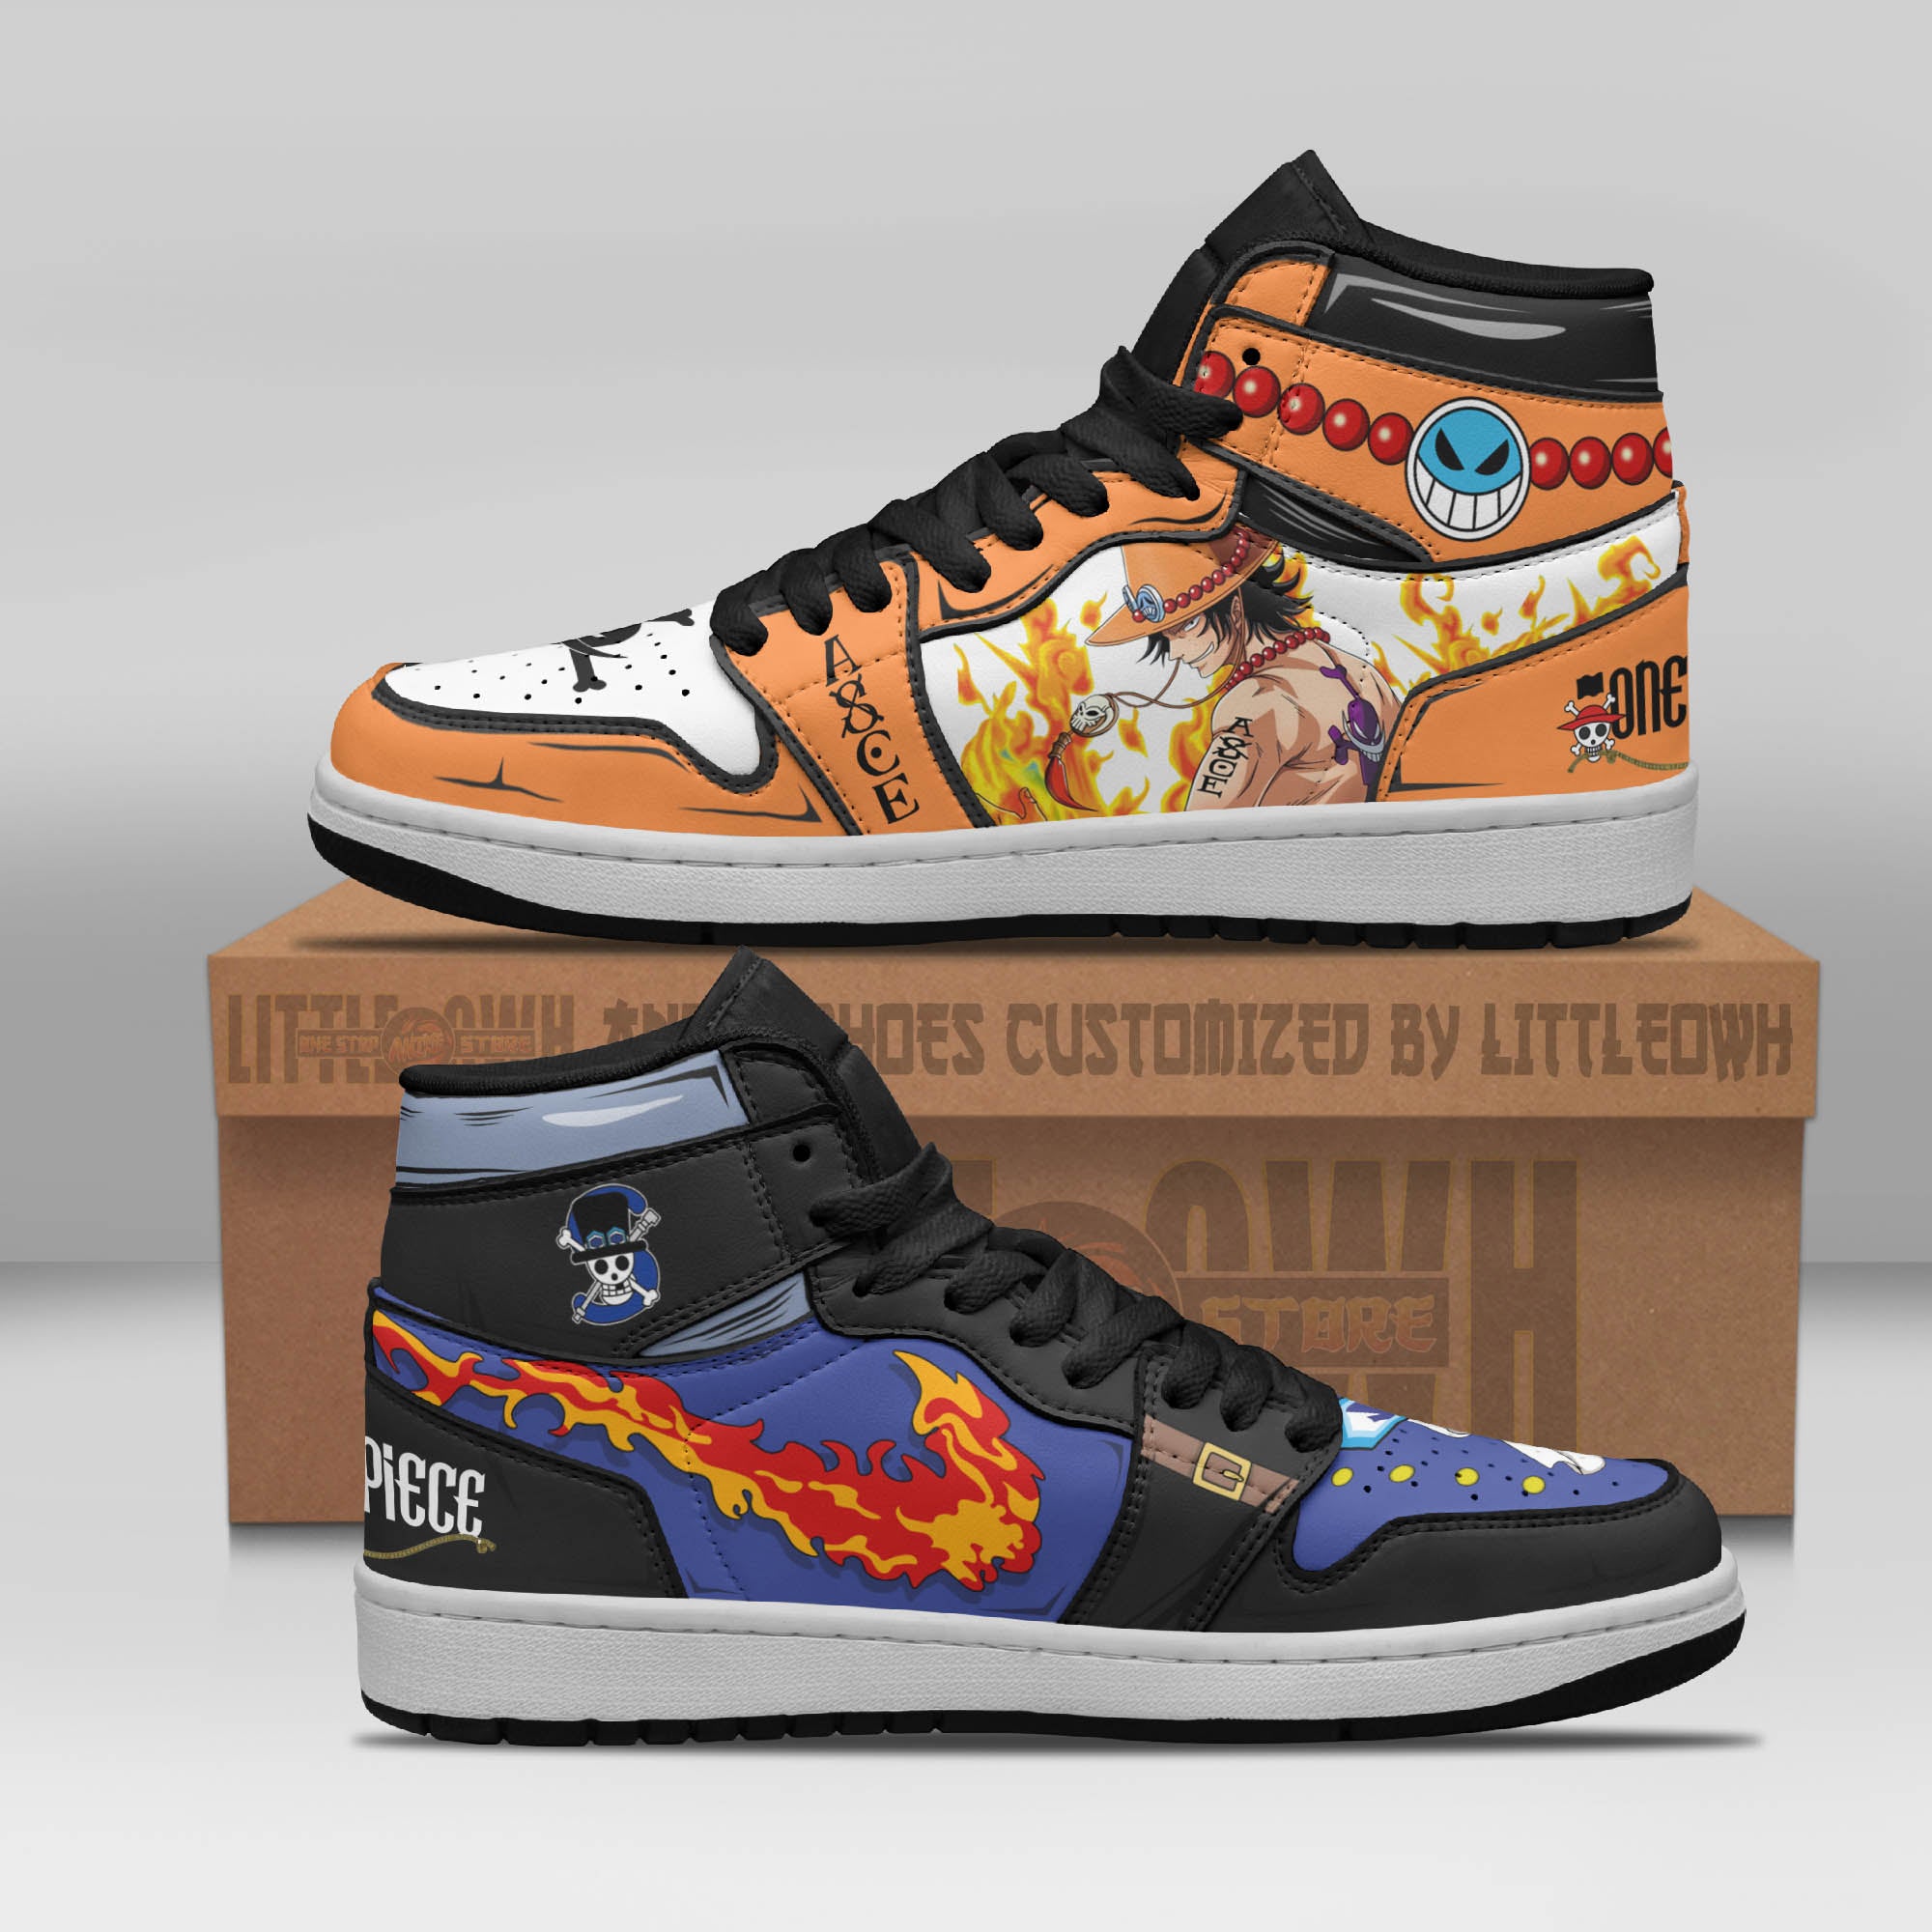 Sabo X Portgas D Ace Anime Shoes Custom One Piece Jd Sneakers